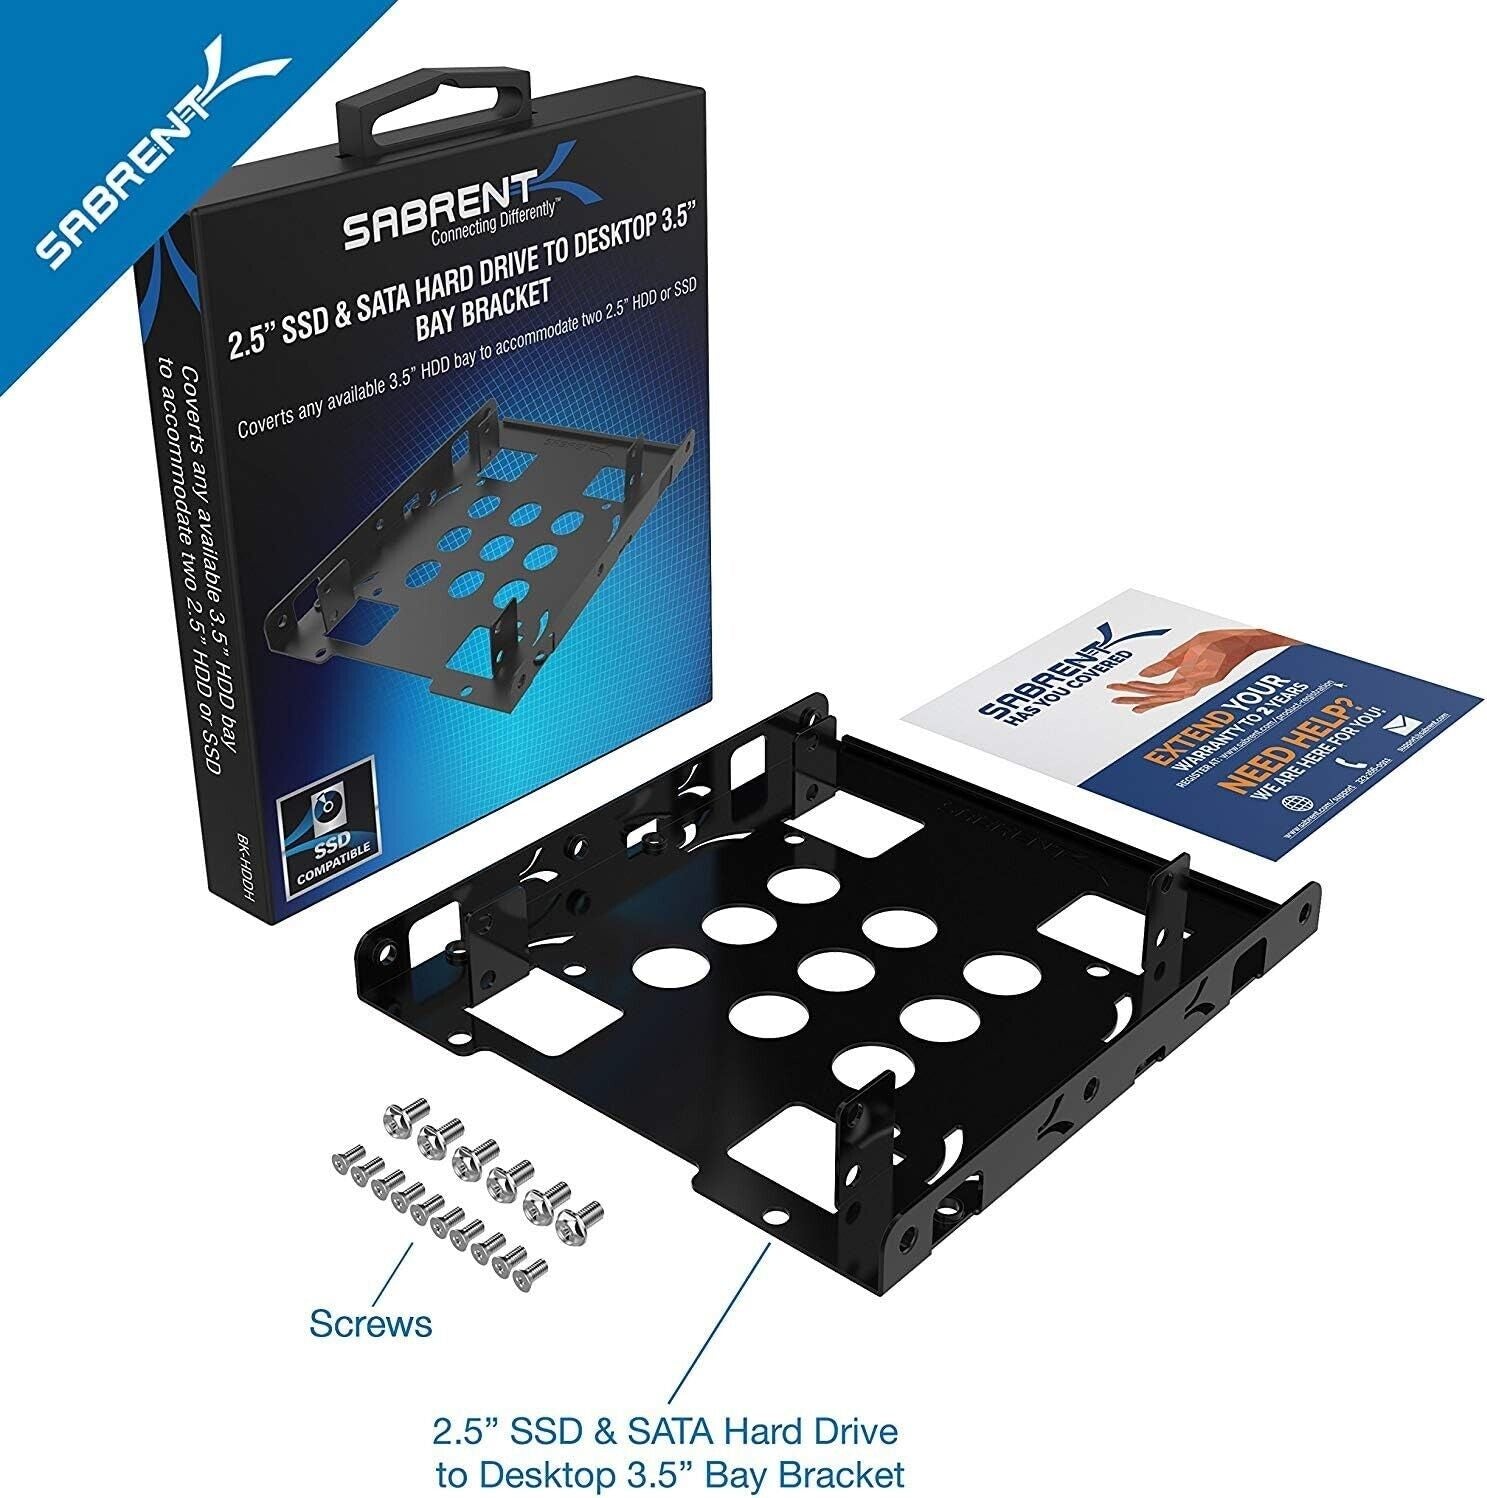 Sabrent BK-HDDH 2.5" to 3.5" Hard Drive Mount Bracket HDD Notebook to Desktop PC